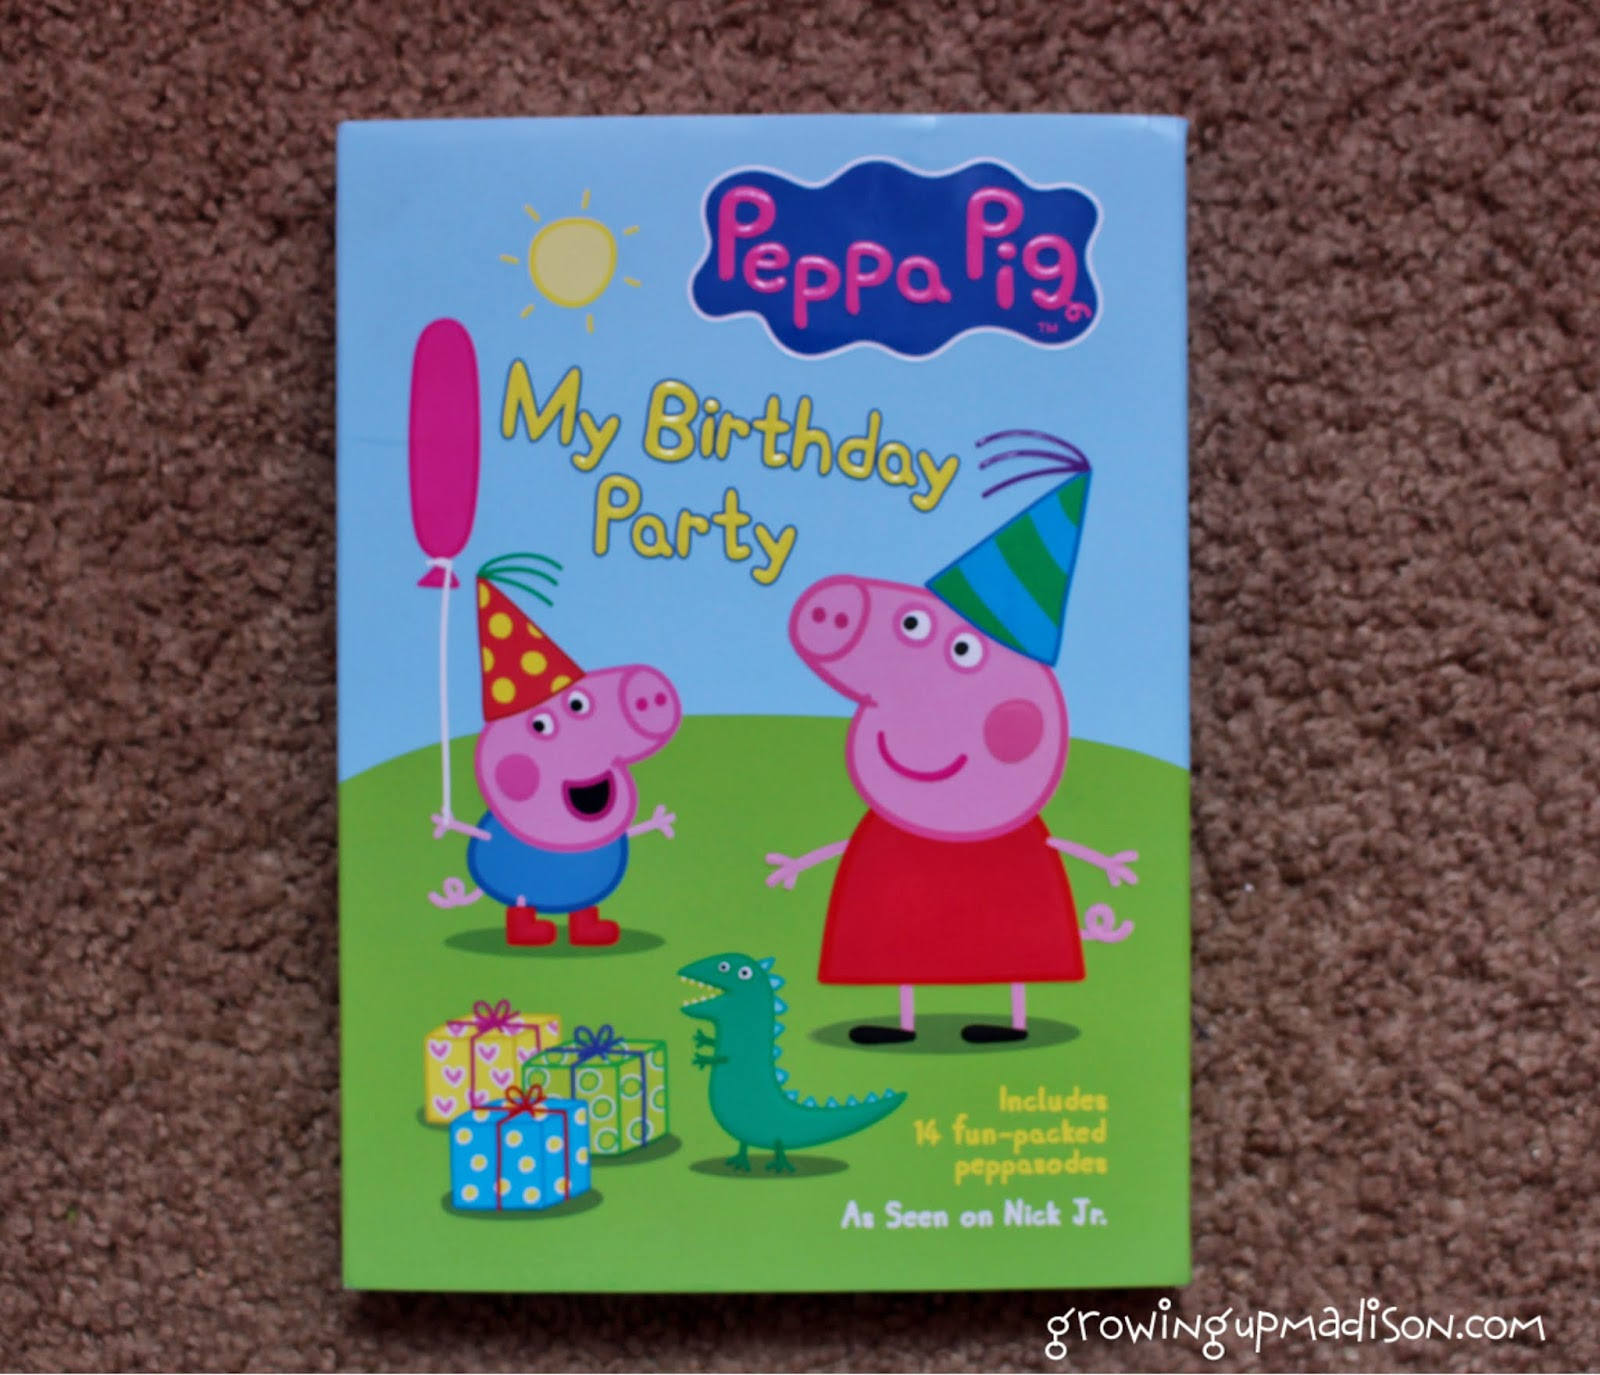 Peppa Pig My Birthday Party
 Peppa Pig My Birthday Party DVD & Plush Giveaway